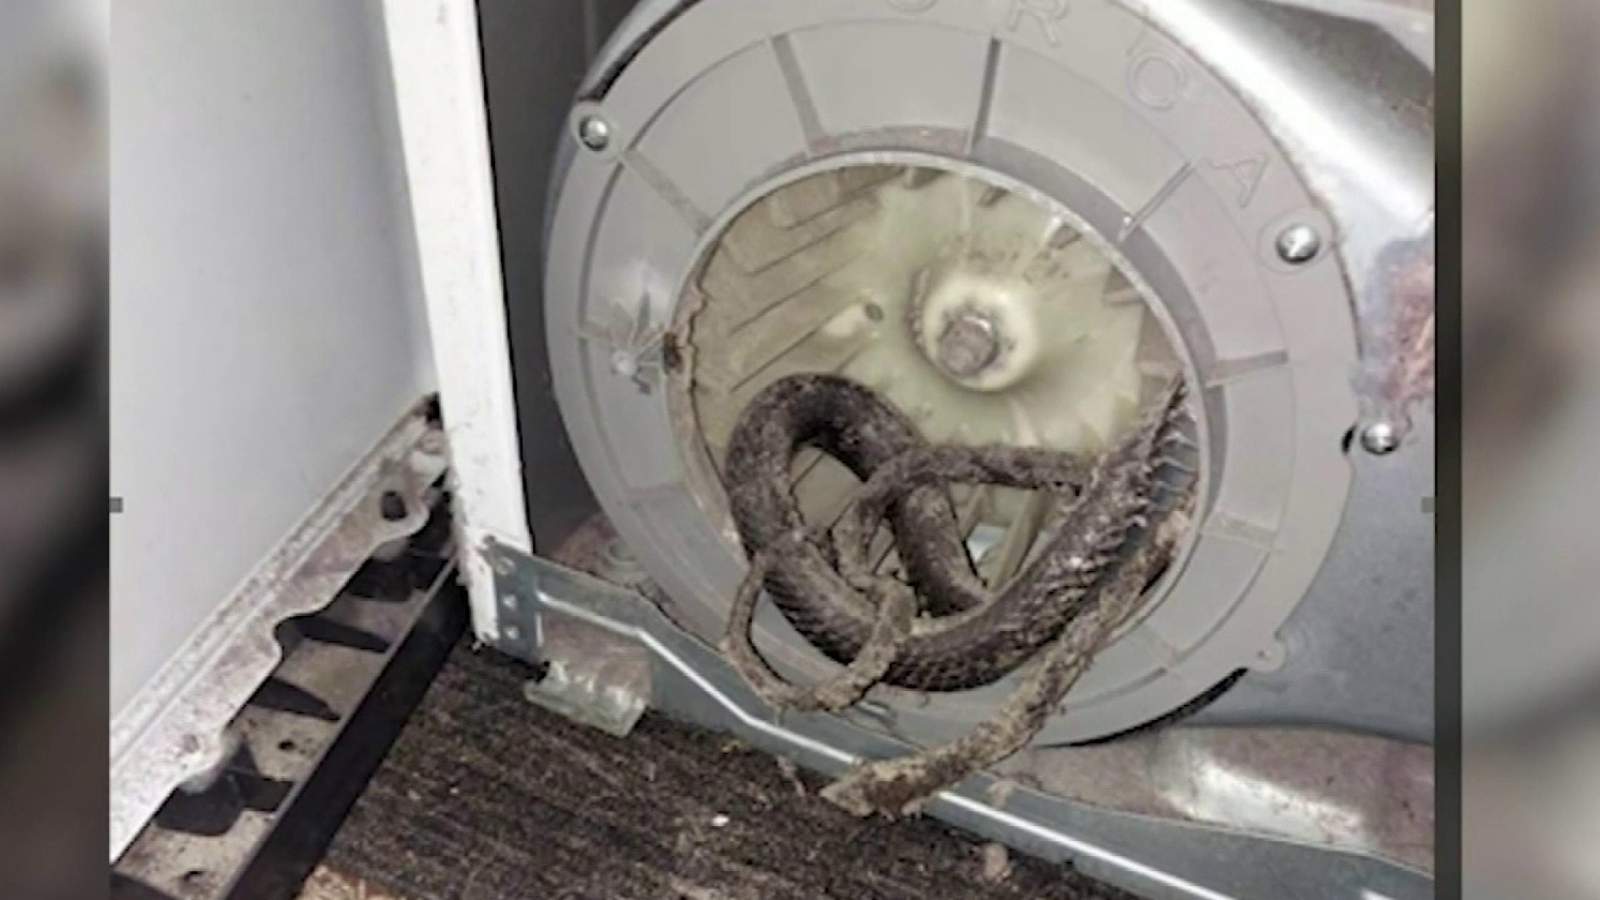 ‘There’s a dead snake in there:’ Florida family finds serpent snarled up in dryer